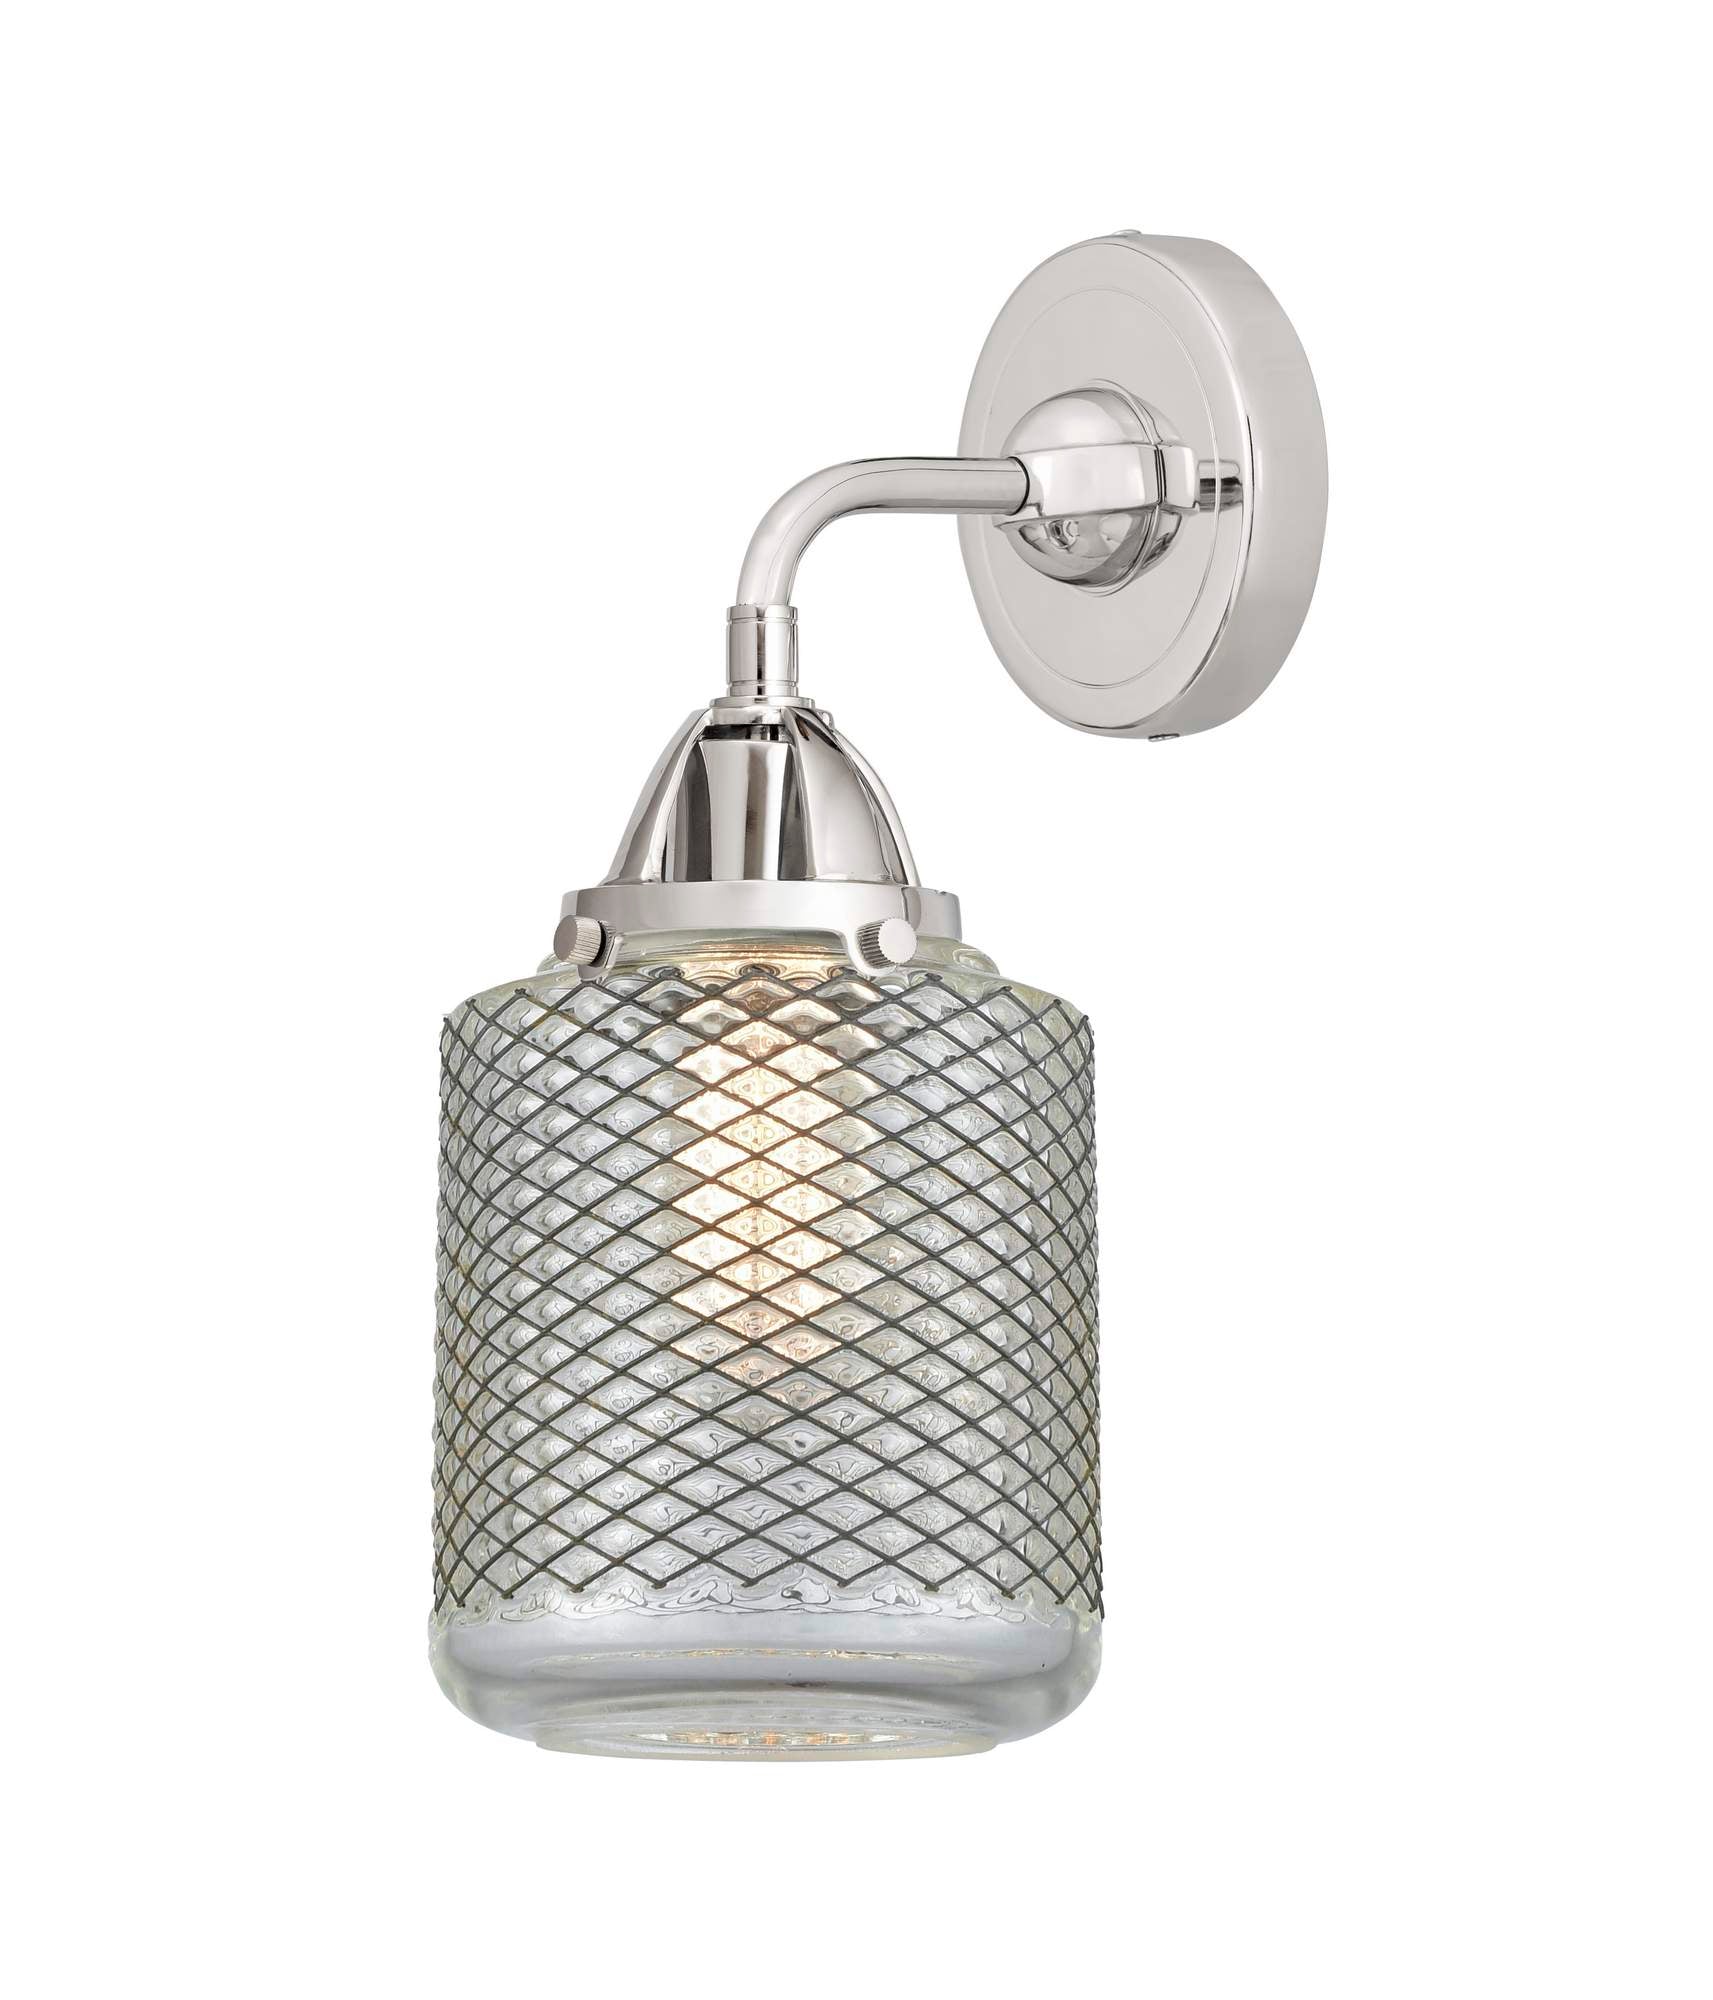 288-1W-PC-G262 1-Light 6" Polished Chrome Sconce - Vintage Wire Mesh Stanton Glass - LED Bulb - Dimmensions: 6 x 7.25 x 12.125 - Glass Up or Down: Yes